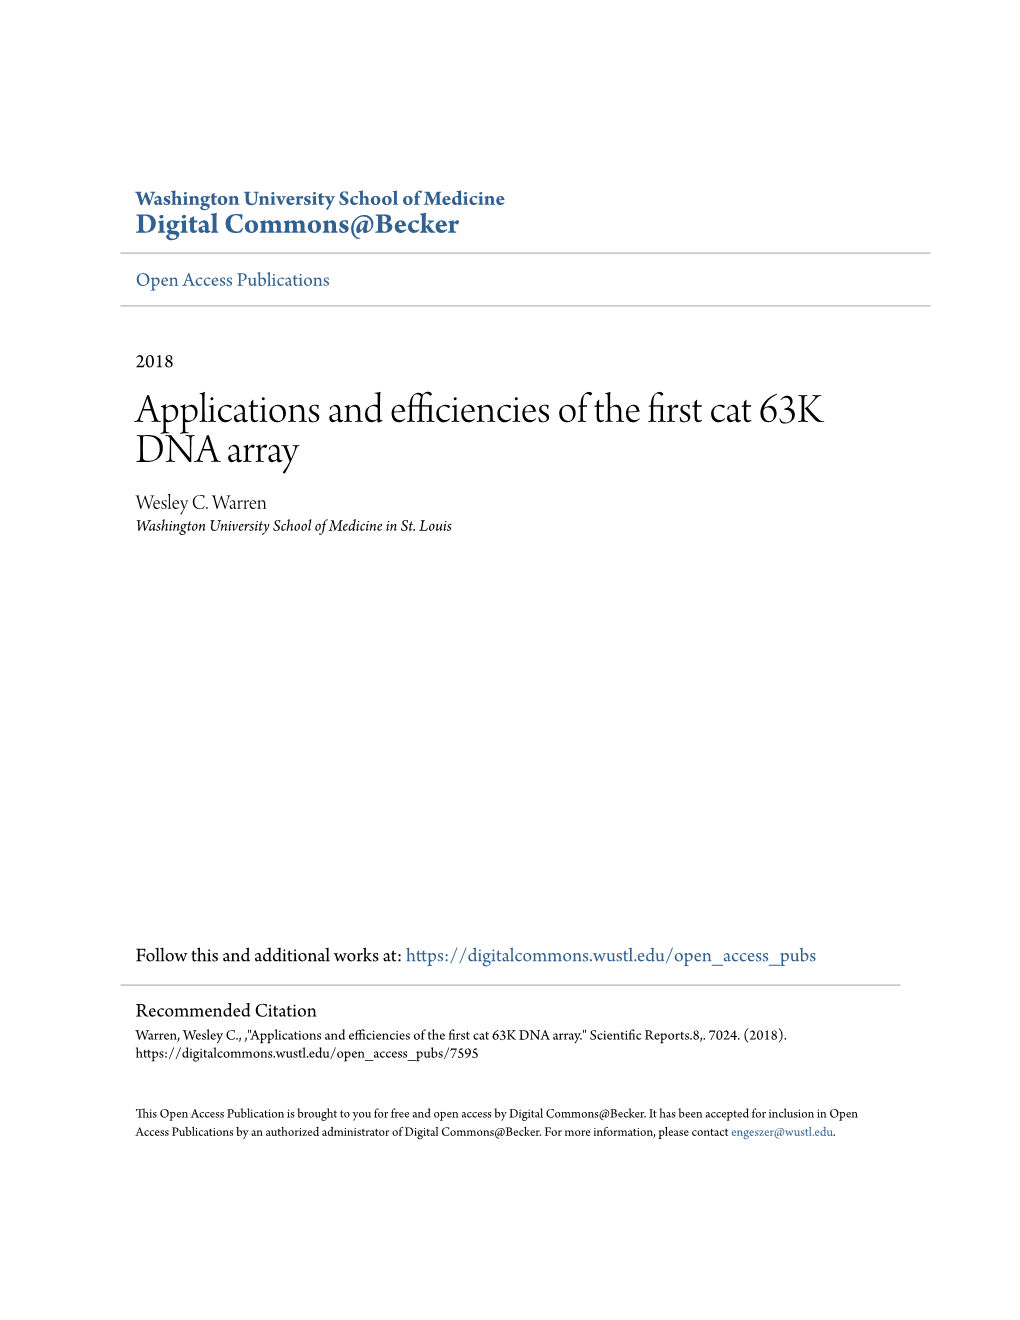 Applications and Efficiencies of the First Cat 63K DNA Array Wesley C